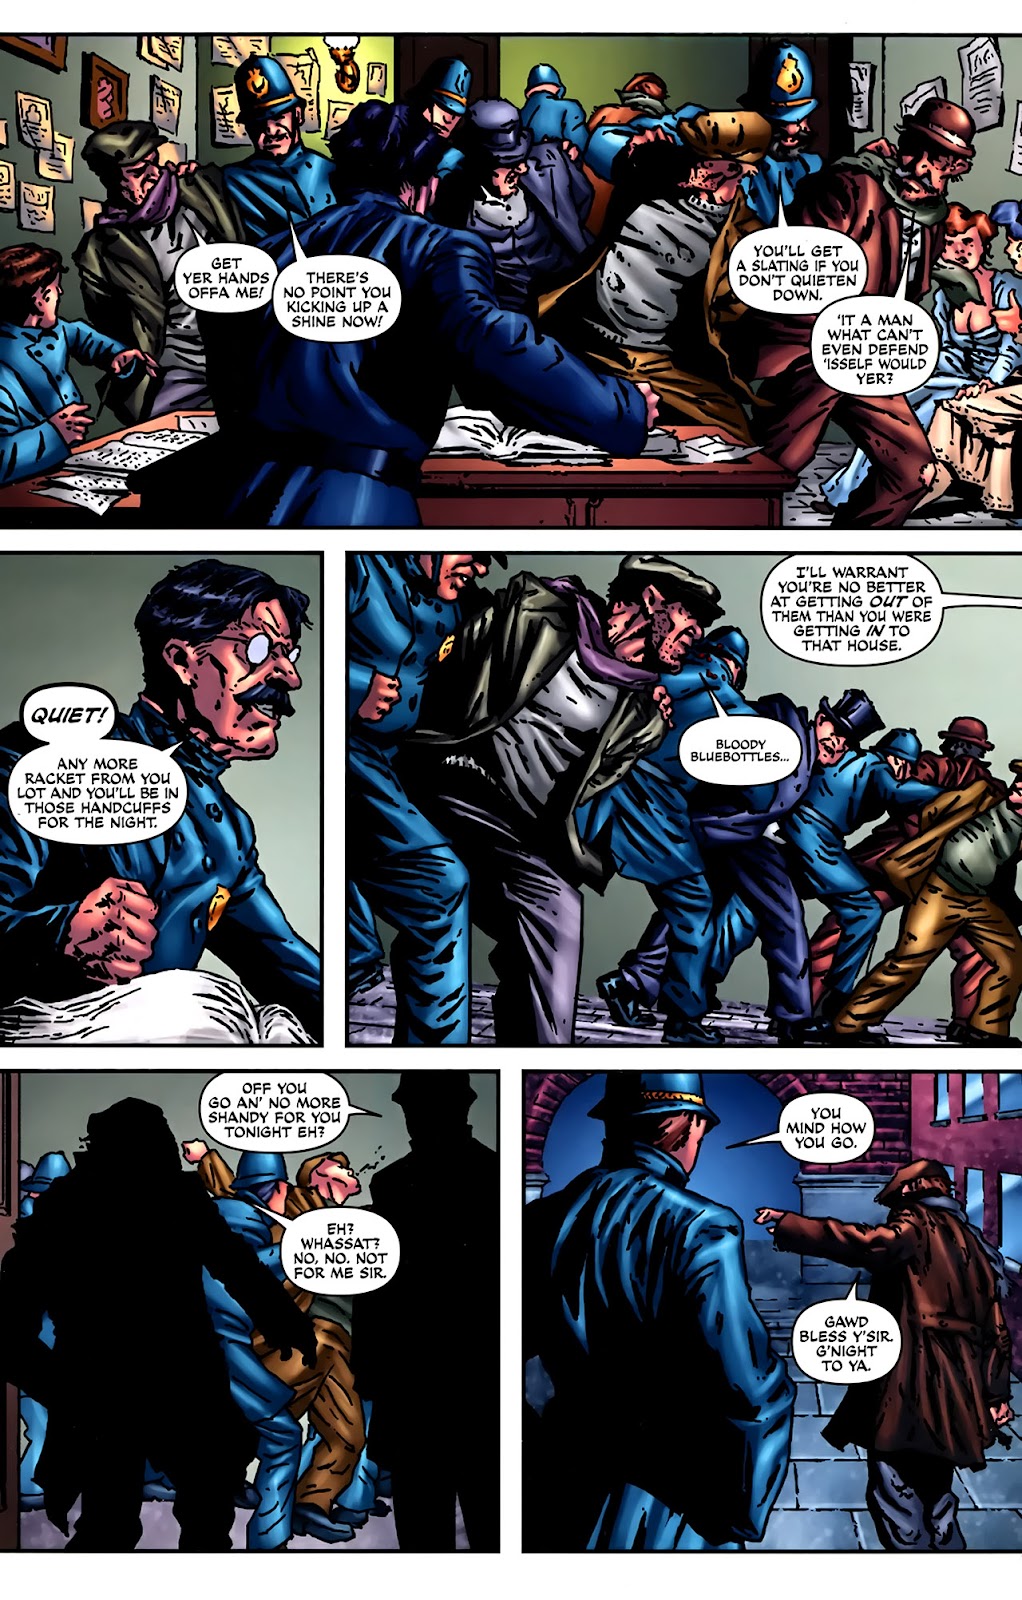 Sherlock Holmes (2009) issue 2 - Page 17